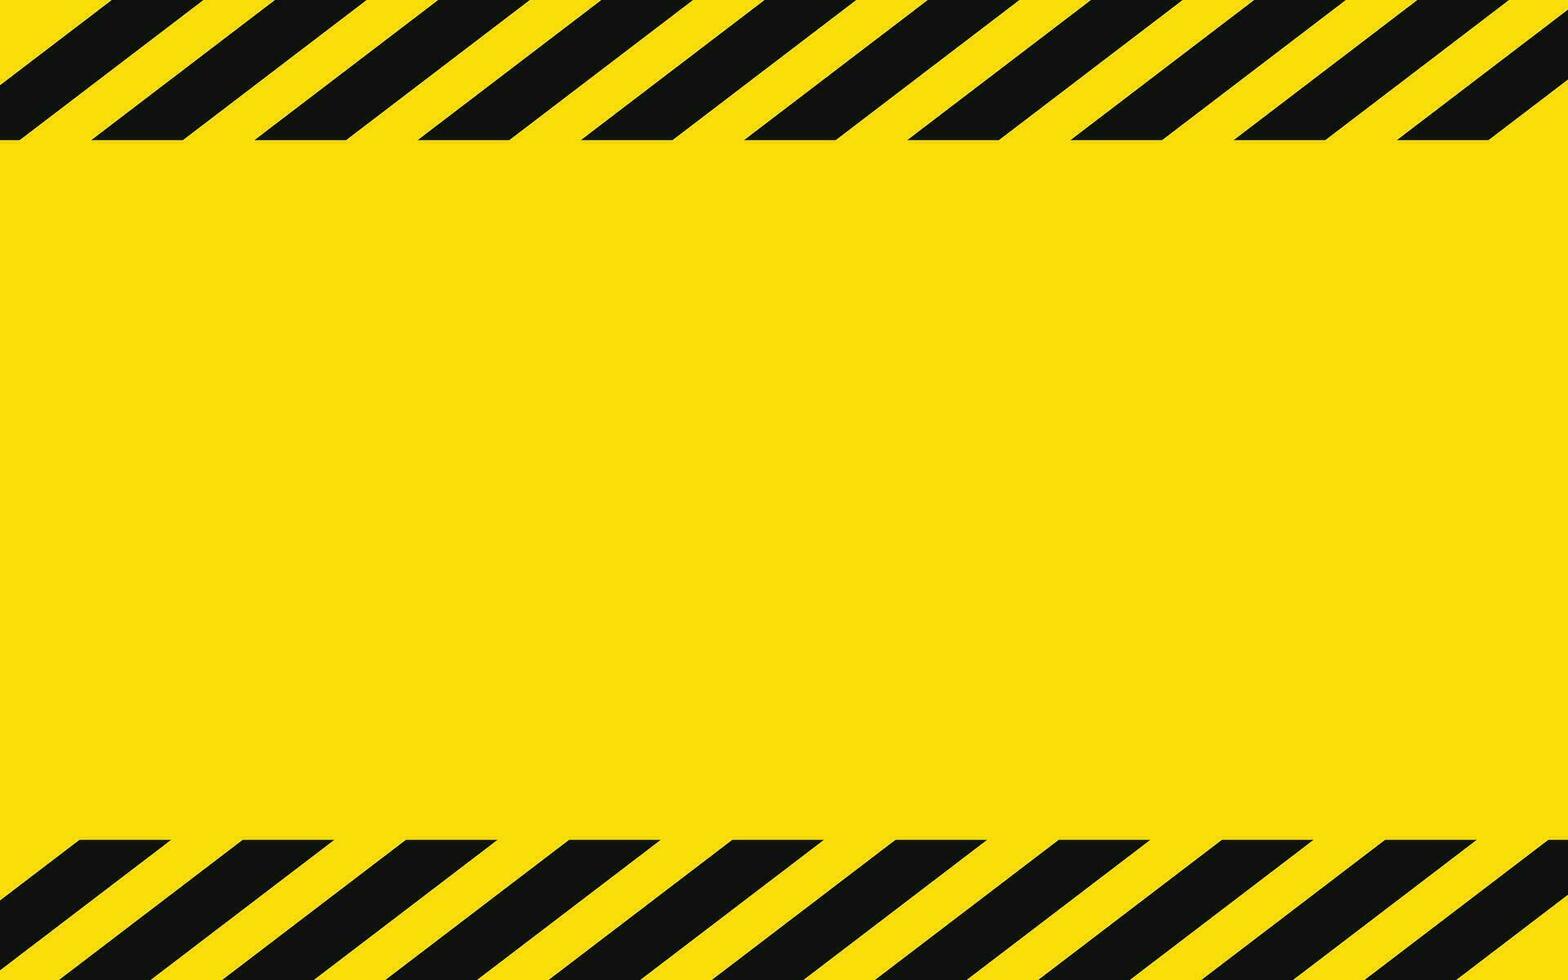 Yellow and black police background to alert the danger area. Caution tape Background warning blank illustration vector